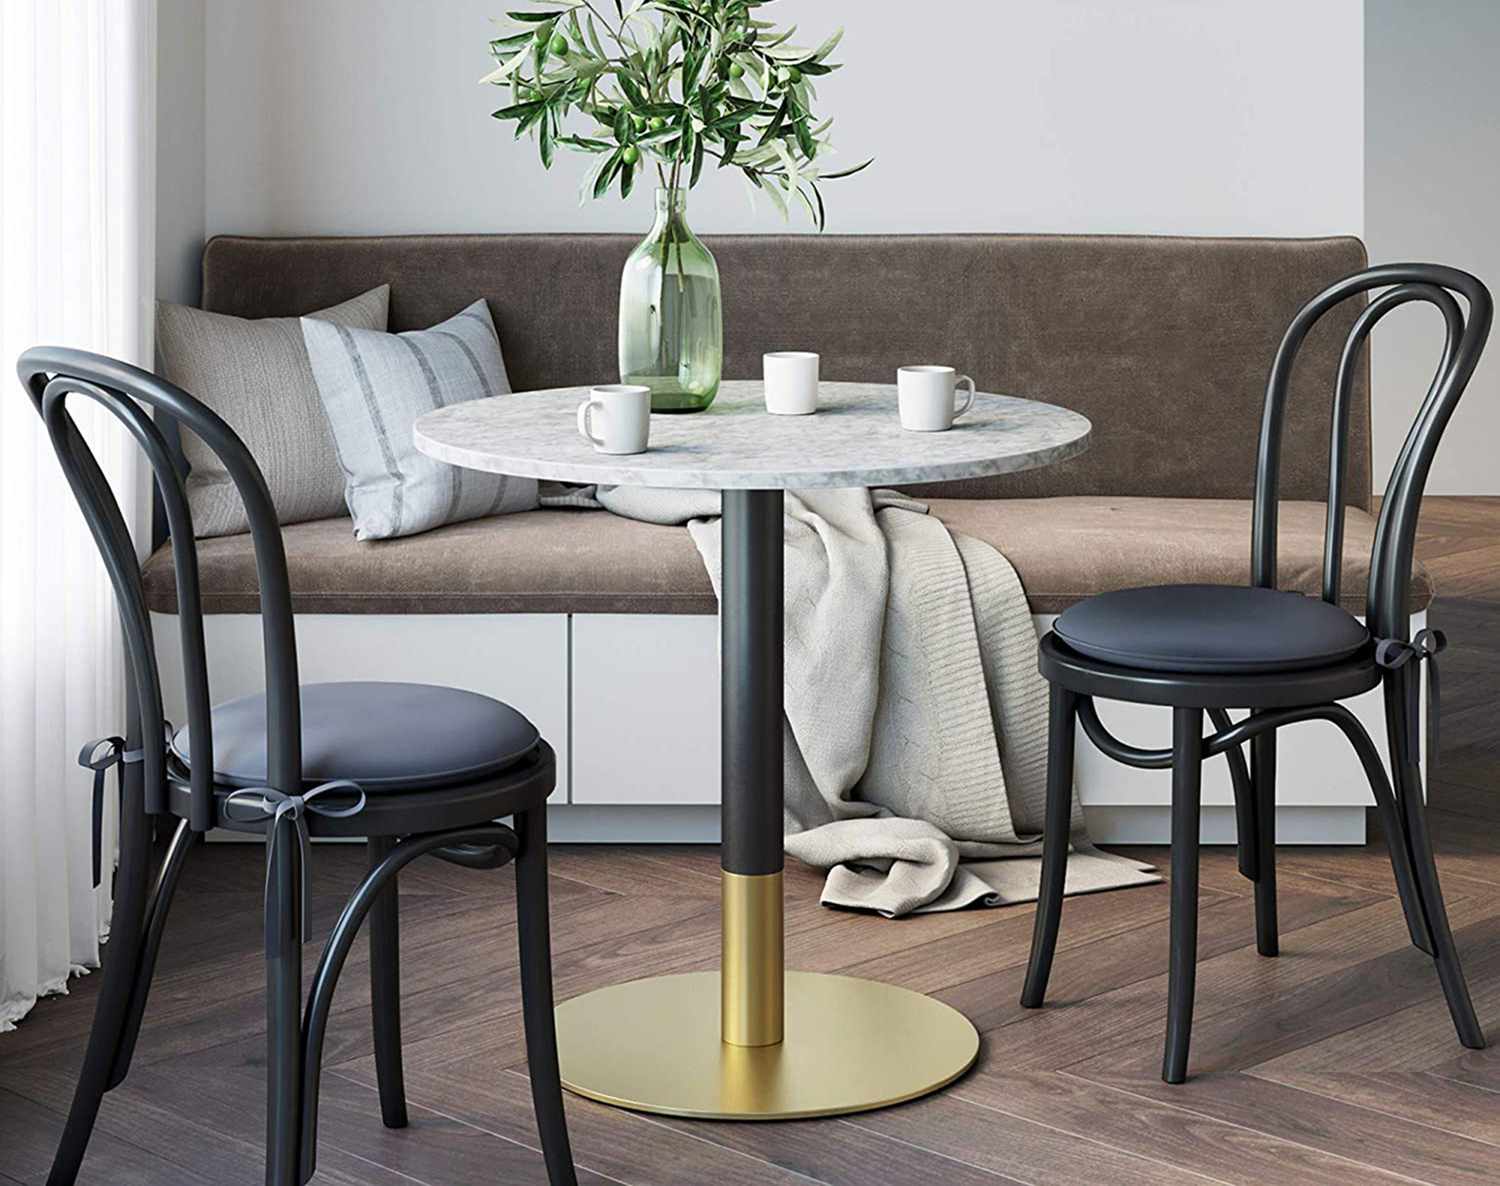 8 Best Dining Tables For Small Spaces, Small Dining Room Sets